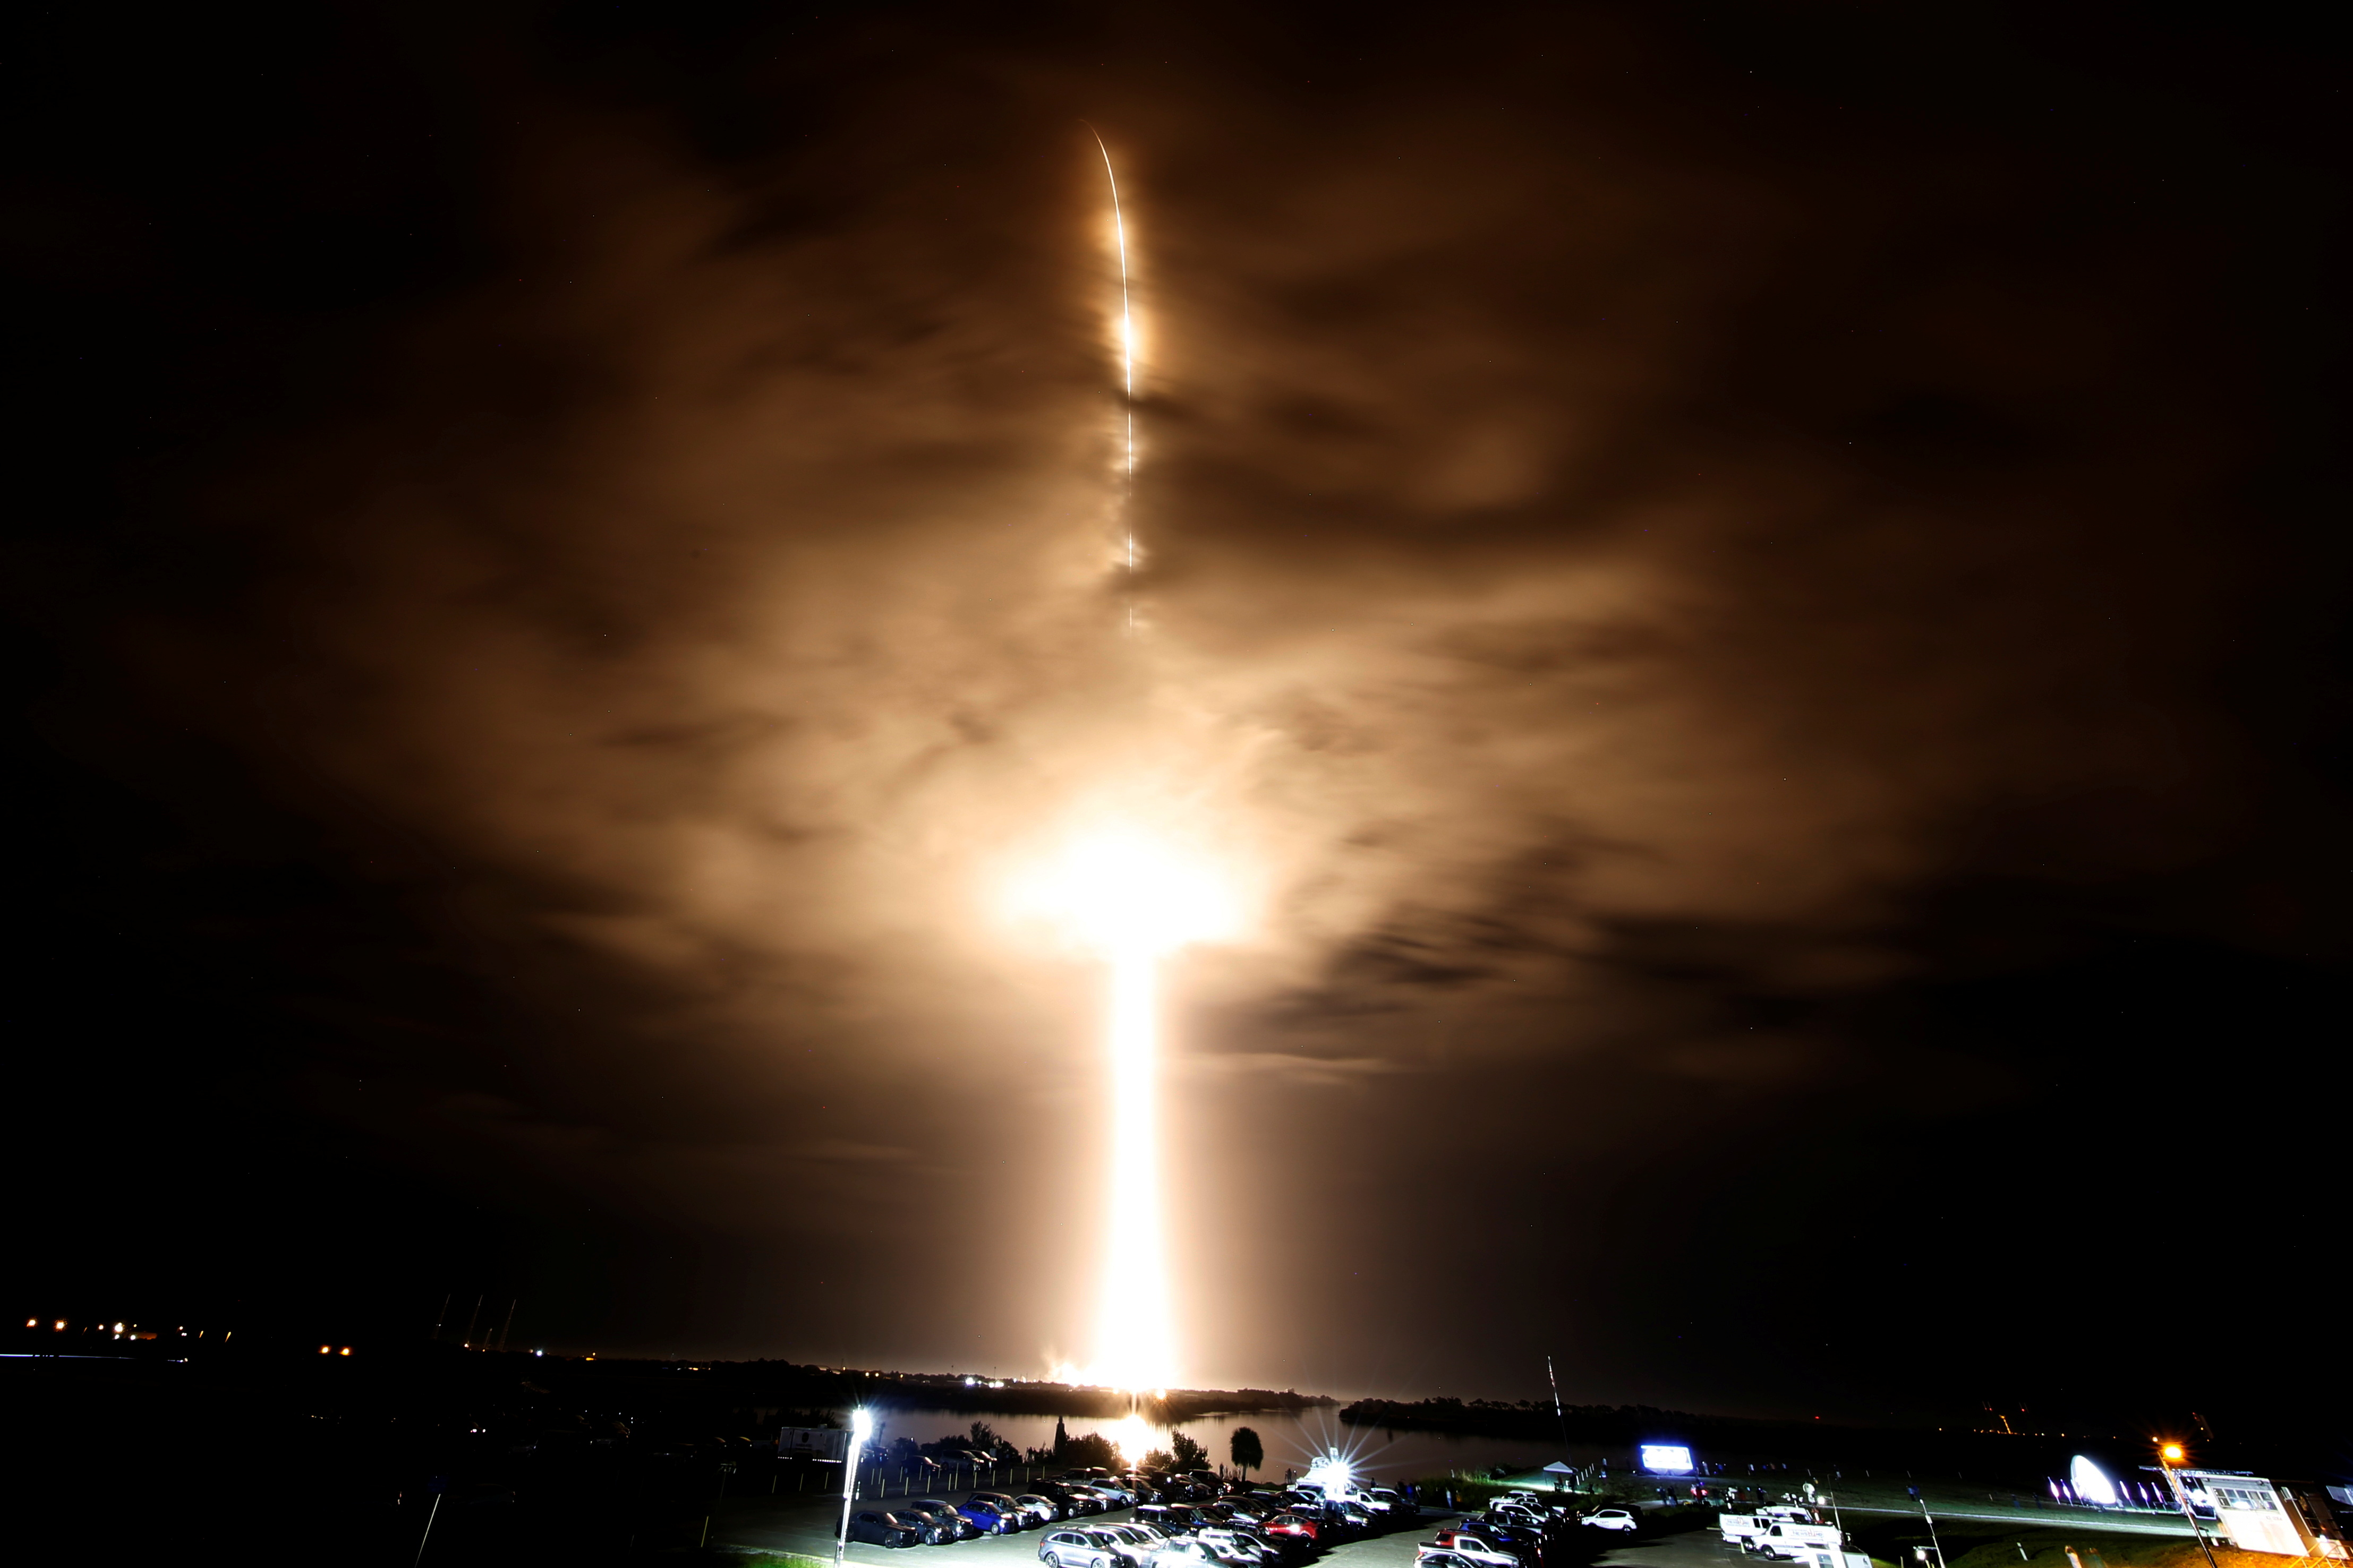 FILE PHOTO: A SpaceX Falcon 9 rocket, with the Crew Dragon capsule, is launched carrying three NASA and one ESA astronauts on a mission to the International Space Station at the Kennedy Space Center in Cape Canaveral, Florida, U.S. November 10, 2021. REUTERS/Joe Skipper/File Photo